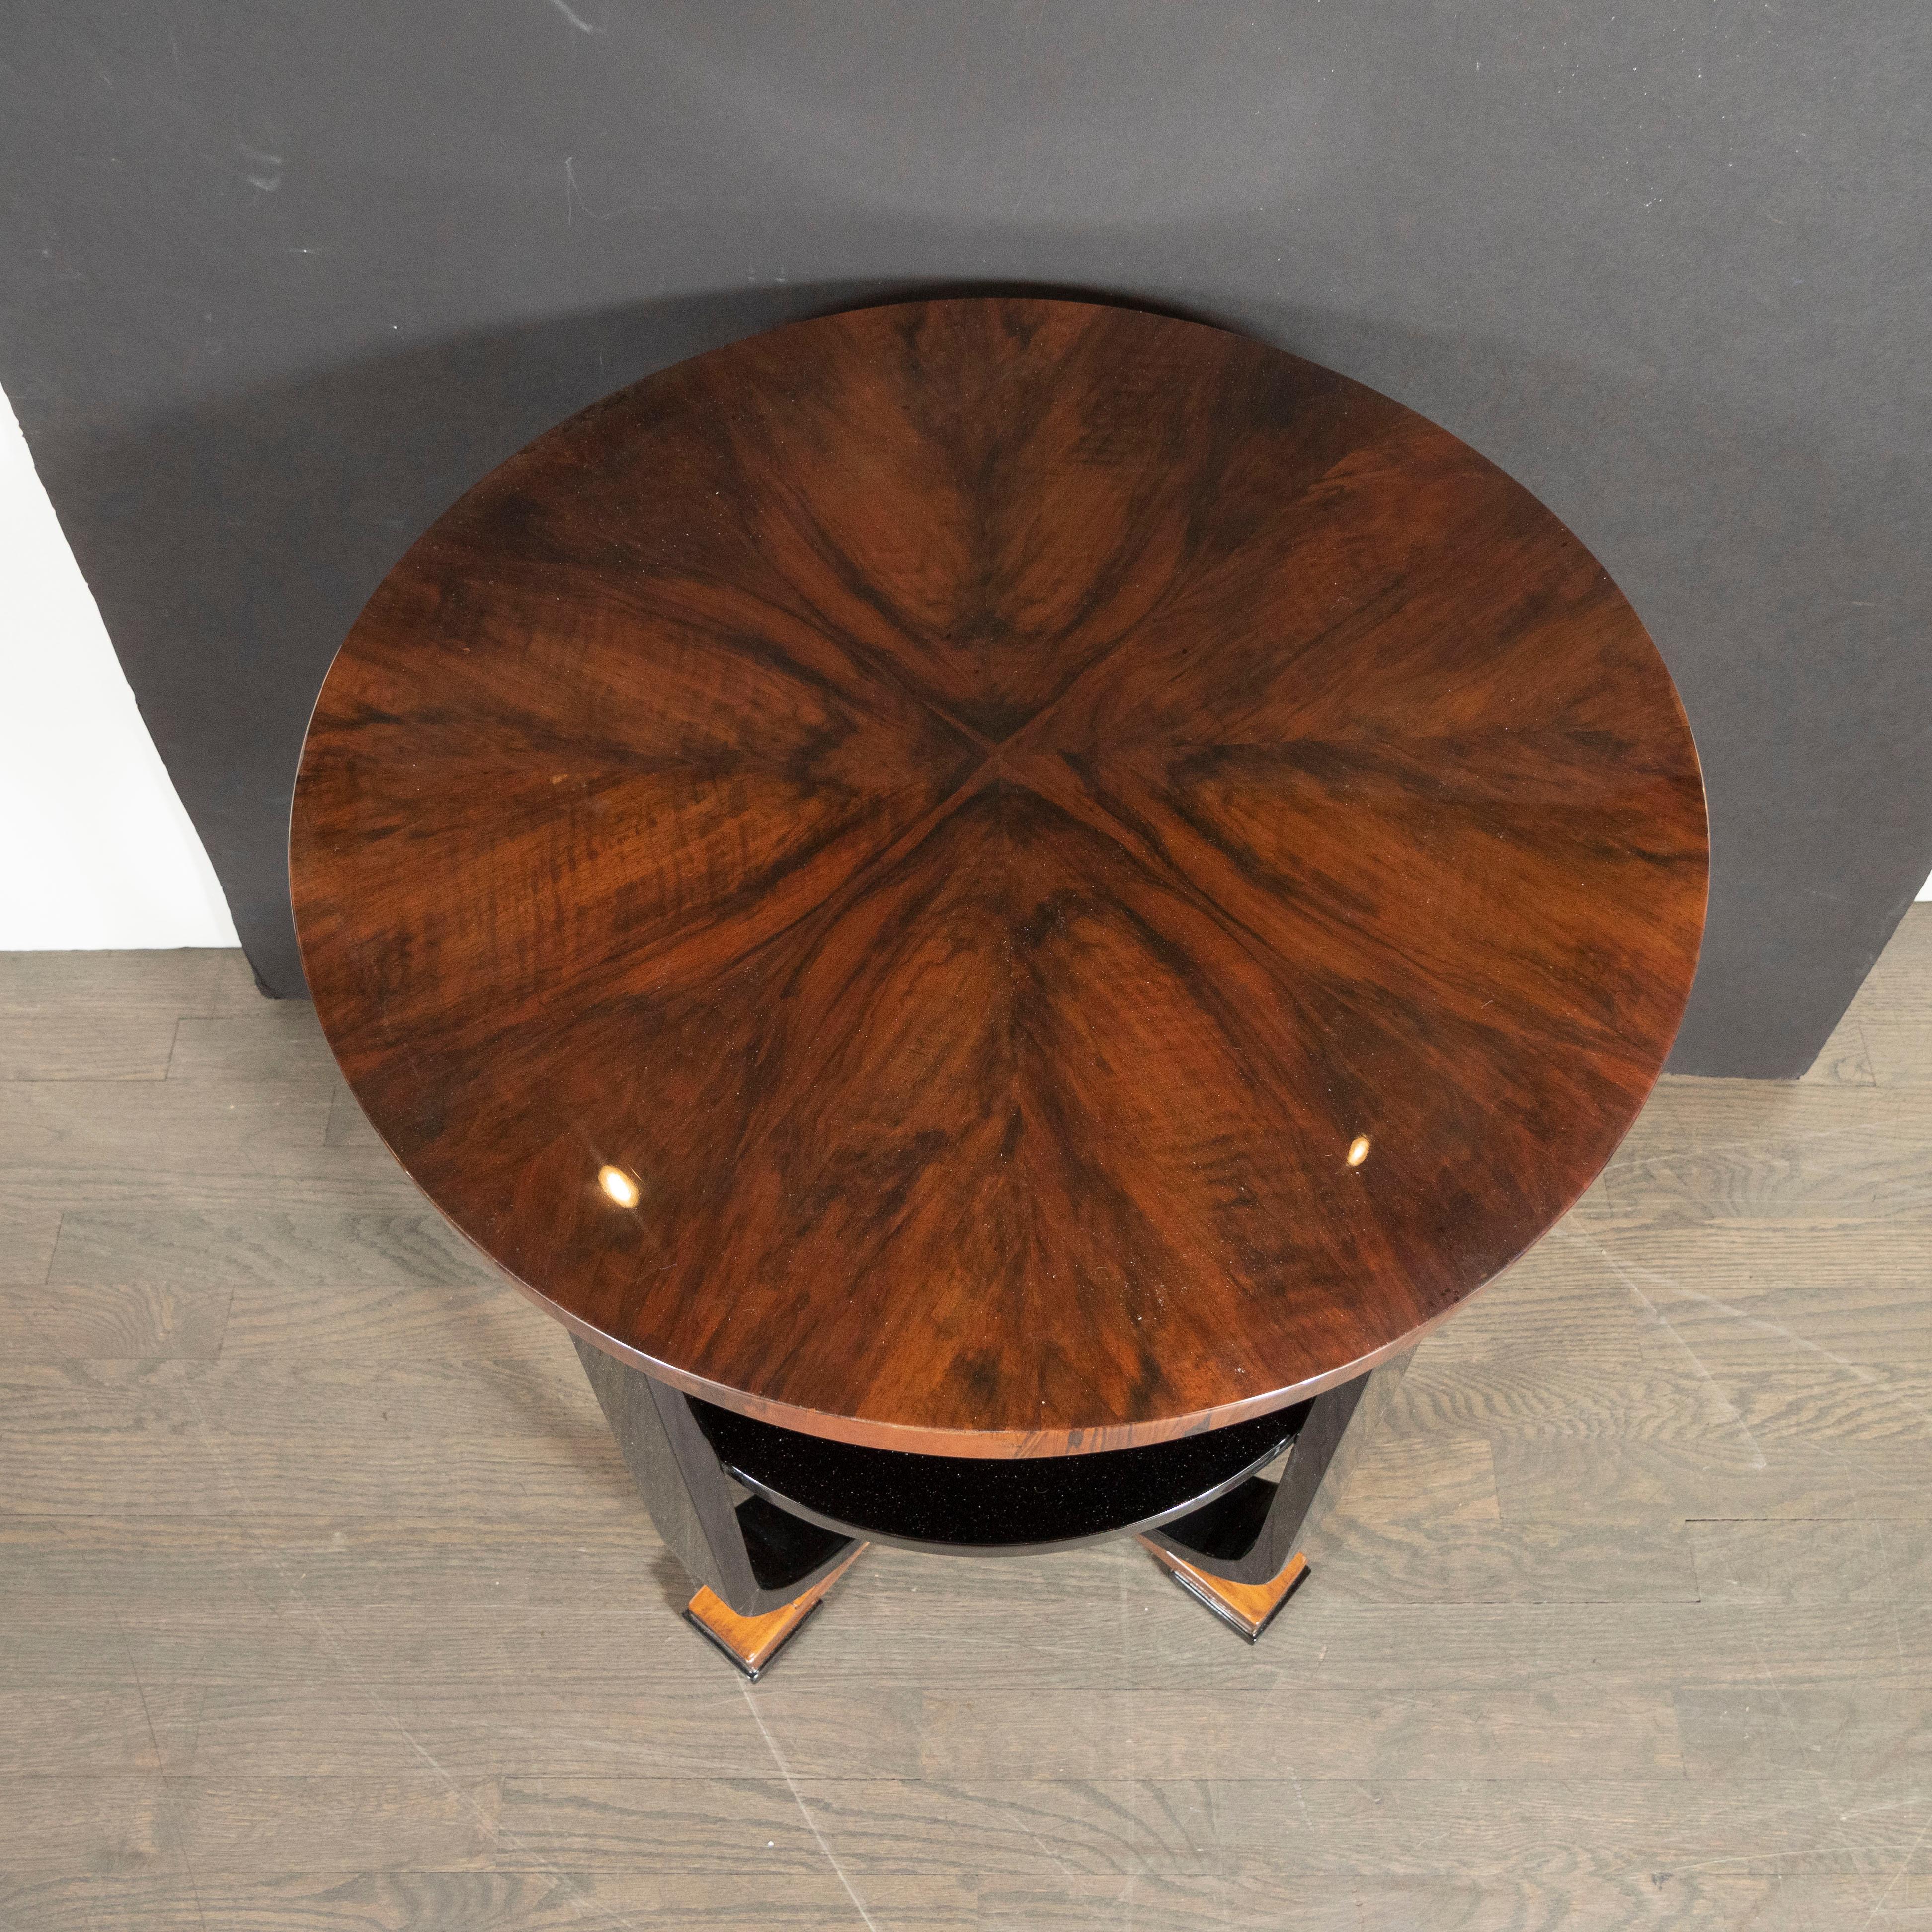 American Art Deco Skyscraper Style Lacquer & Bookmatched Walnut Two-Tier Gueridon Table